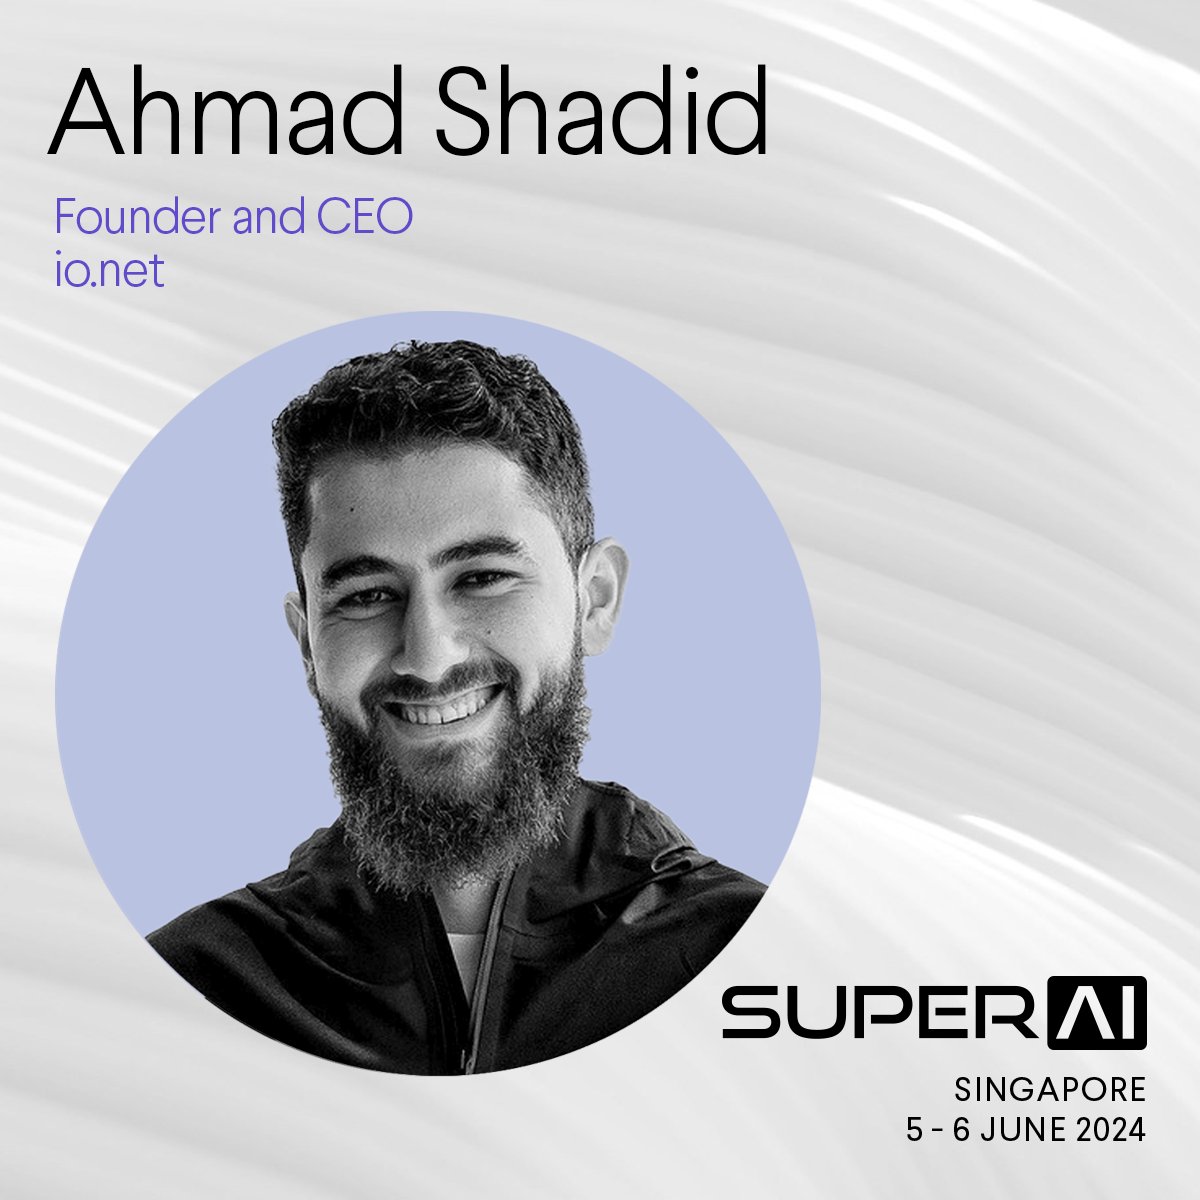 Join @shadid_io at #SuperAI Singapore. Ahmad is the Founder and CEO of @ionet, providing ML engineers with scalable clusters of geo-distributed GPUs at a lower cost than centralised cloud providers. Meet the teams building AI infrastructure this June.